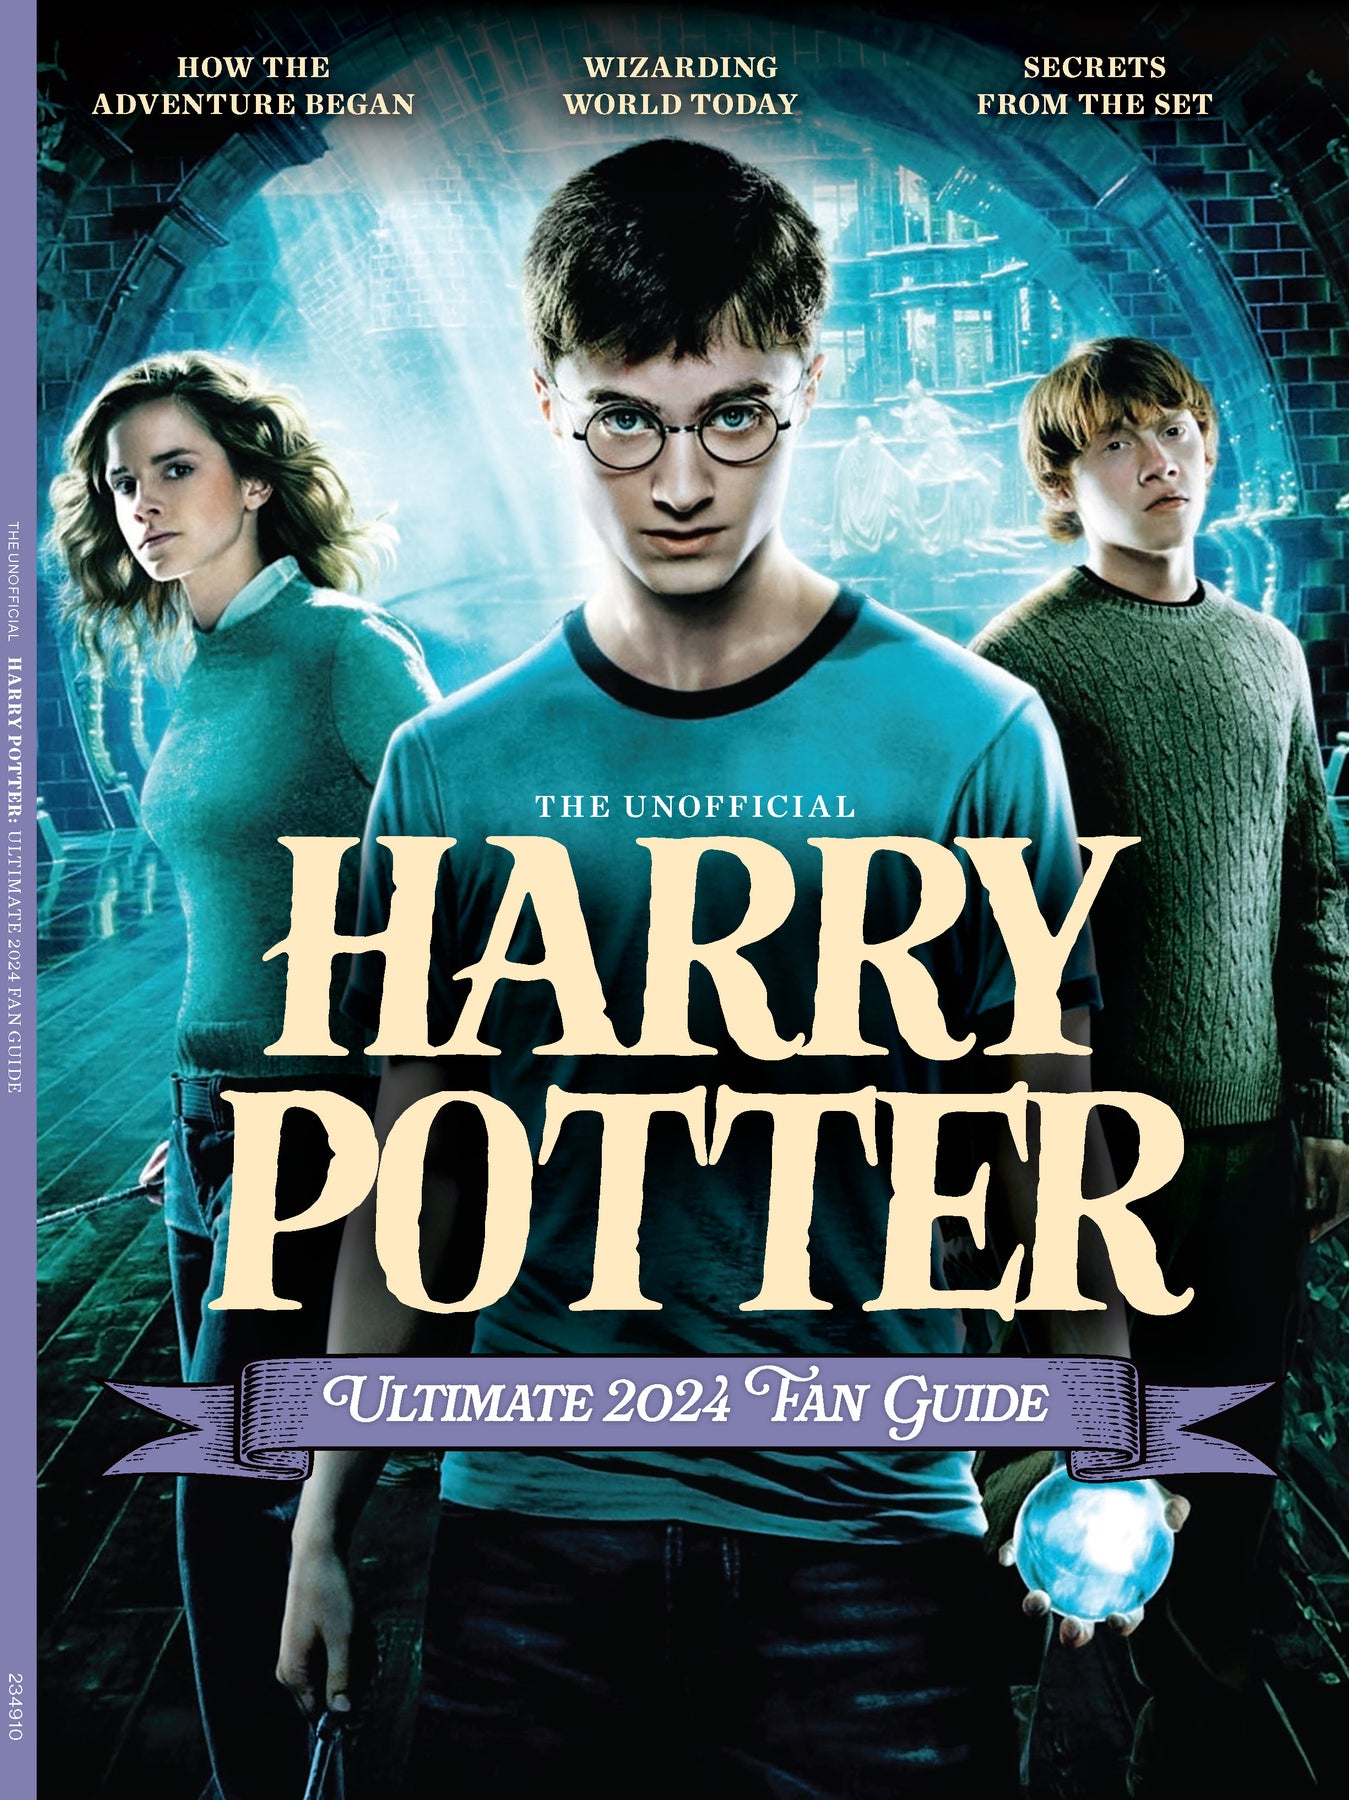 Harry Potter Poster Book: Inside the Magical World - Ultimate